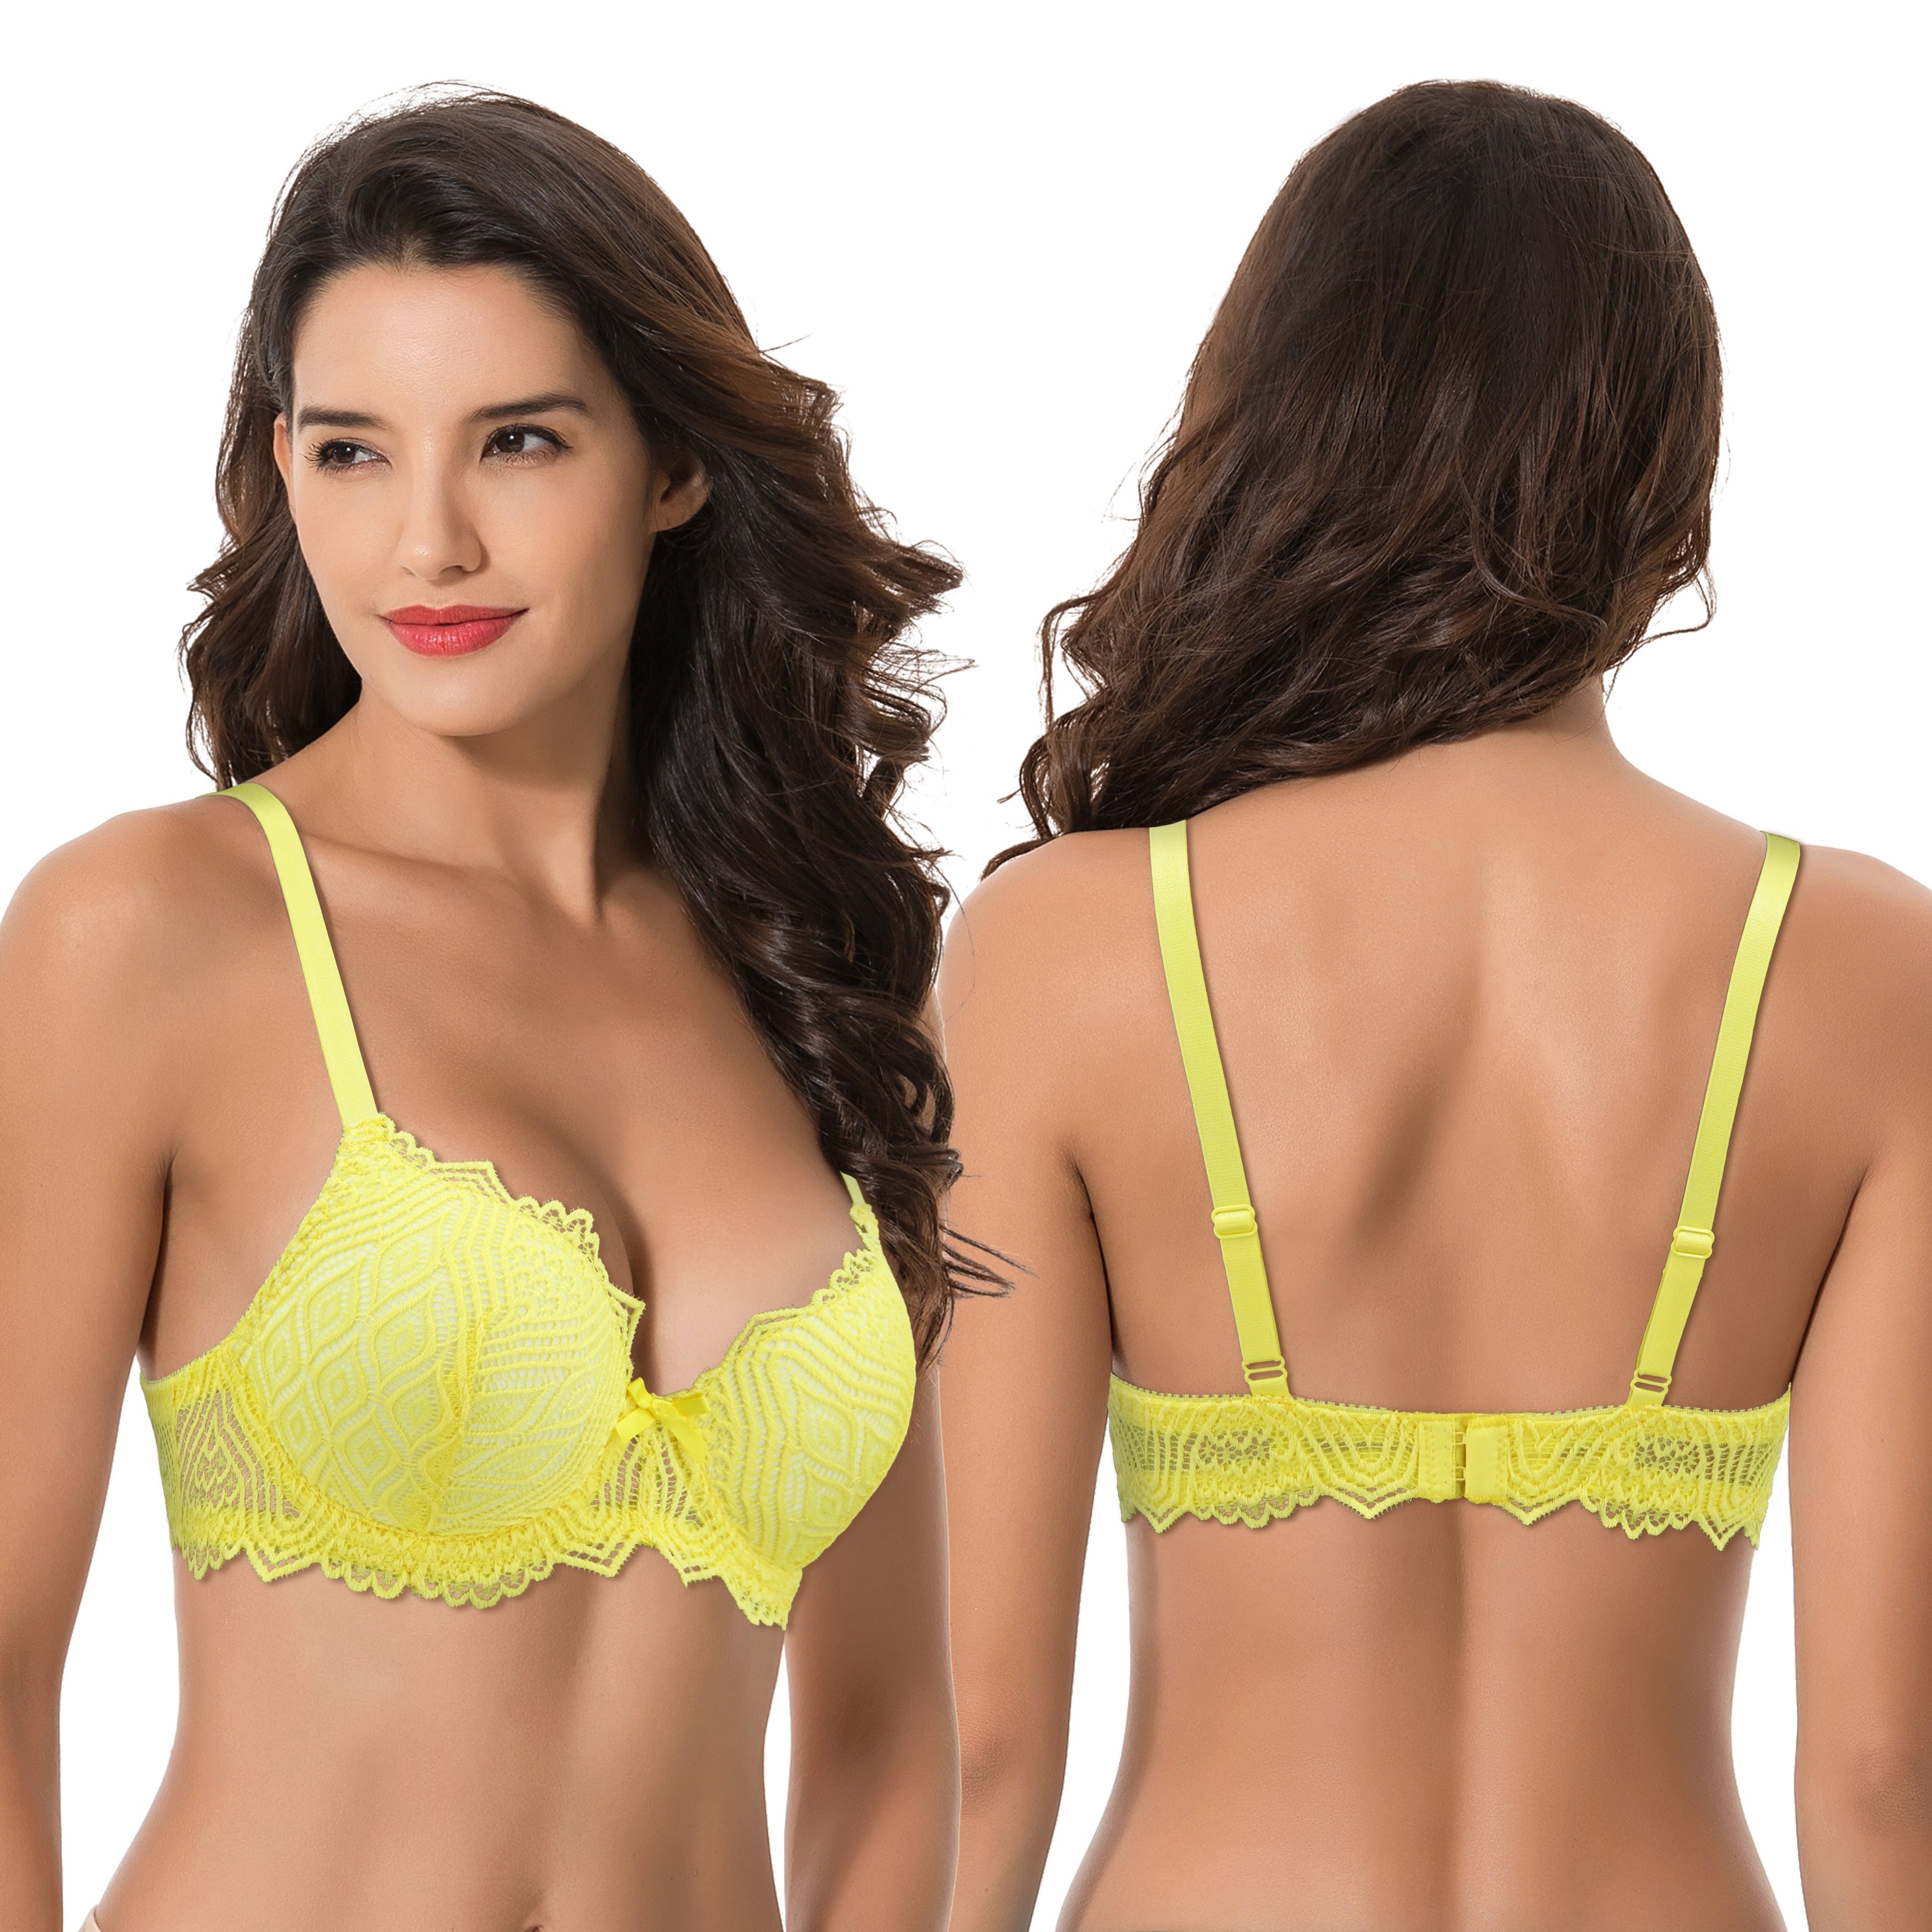 Curve Muse Women's Plus Size Push Up Add 1 Cup Underwire Perfect Shape Lace  Bras-2Pk-Navy,Yellow-32DDD 